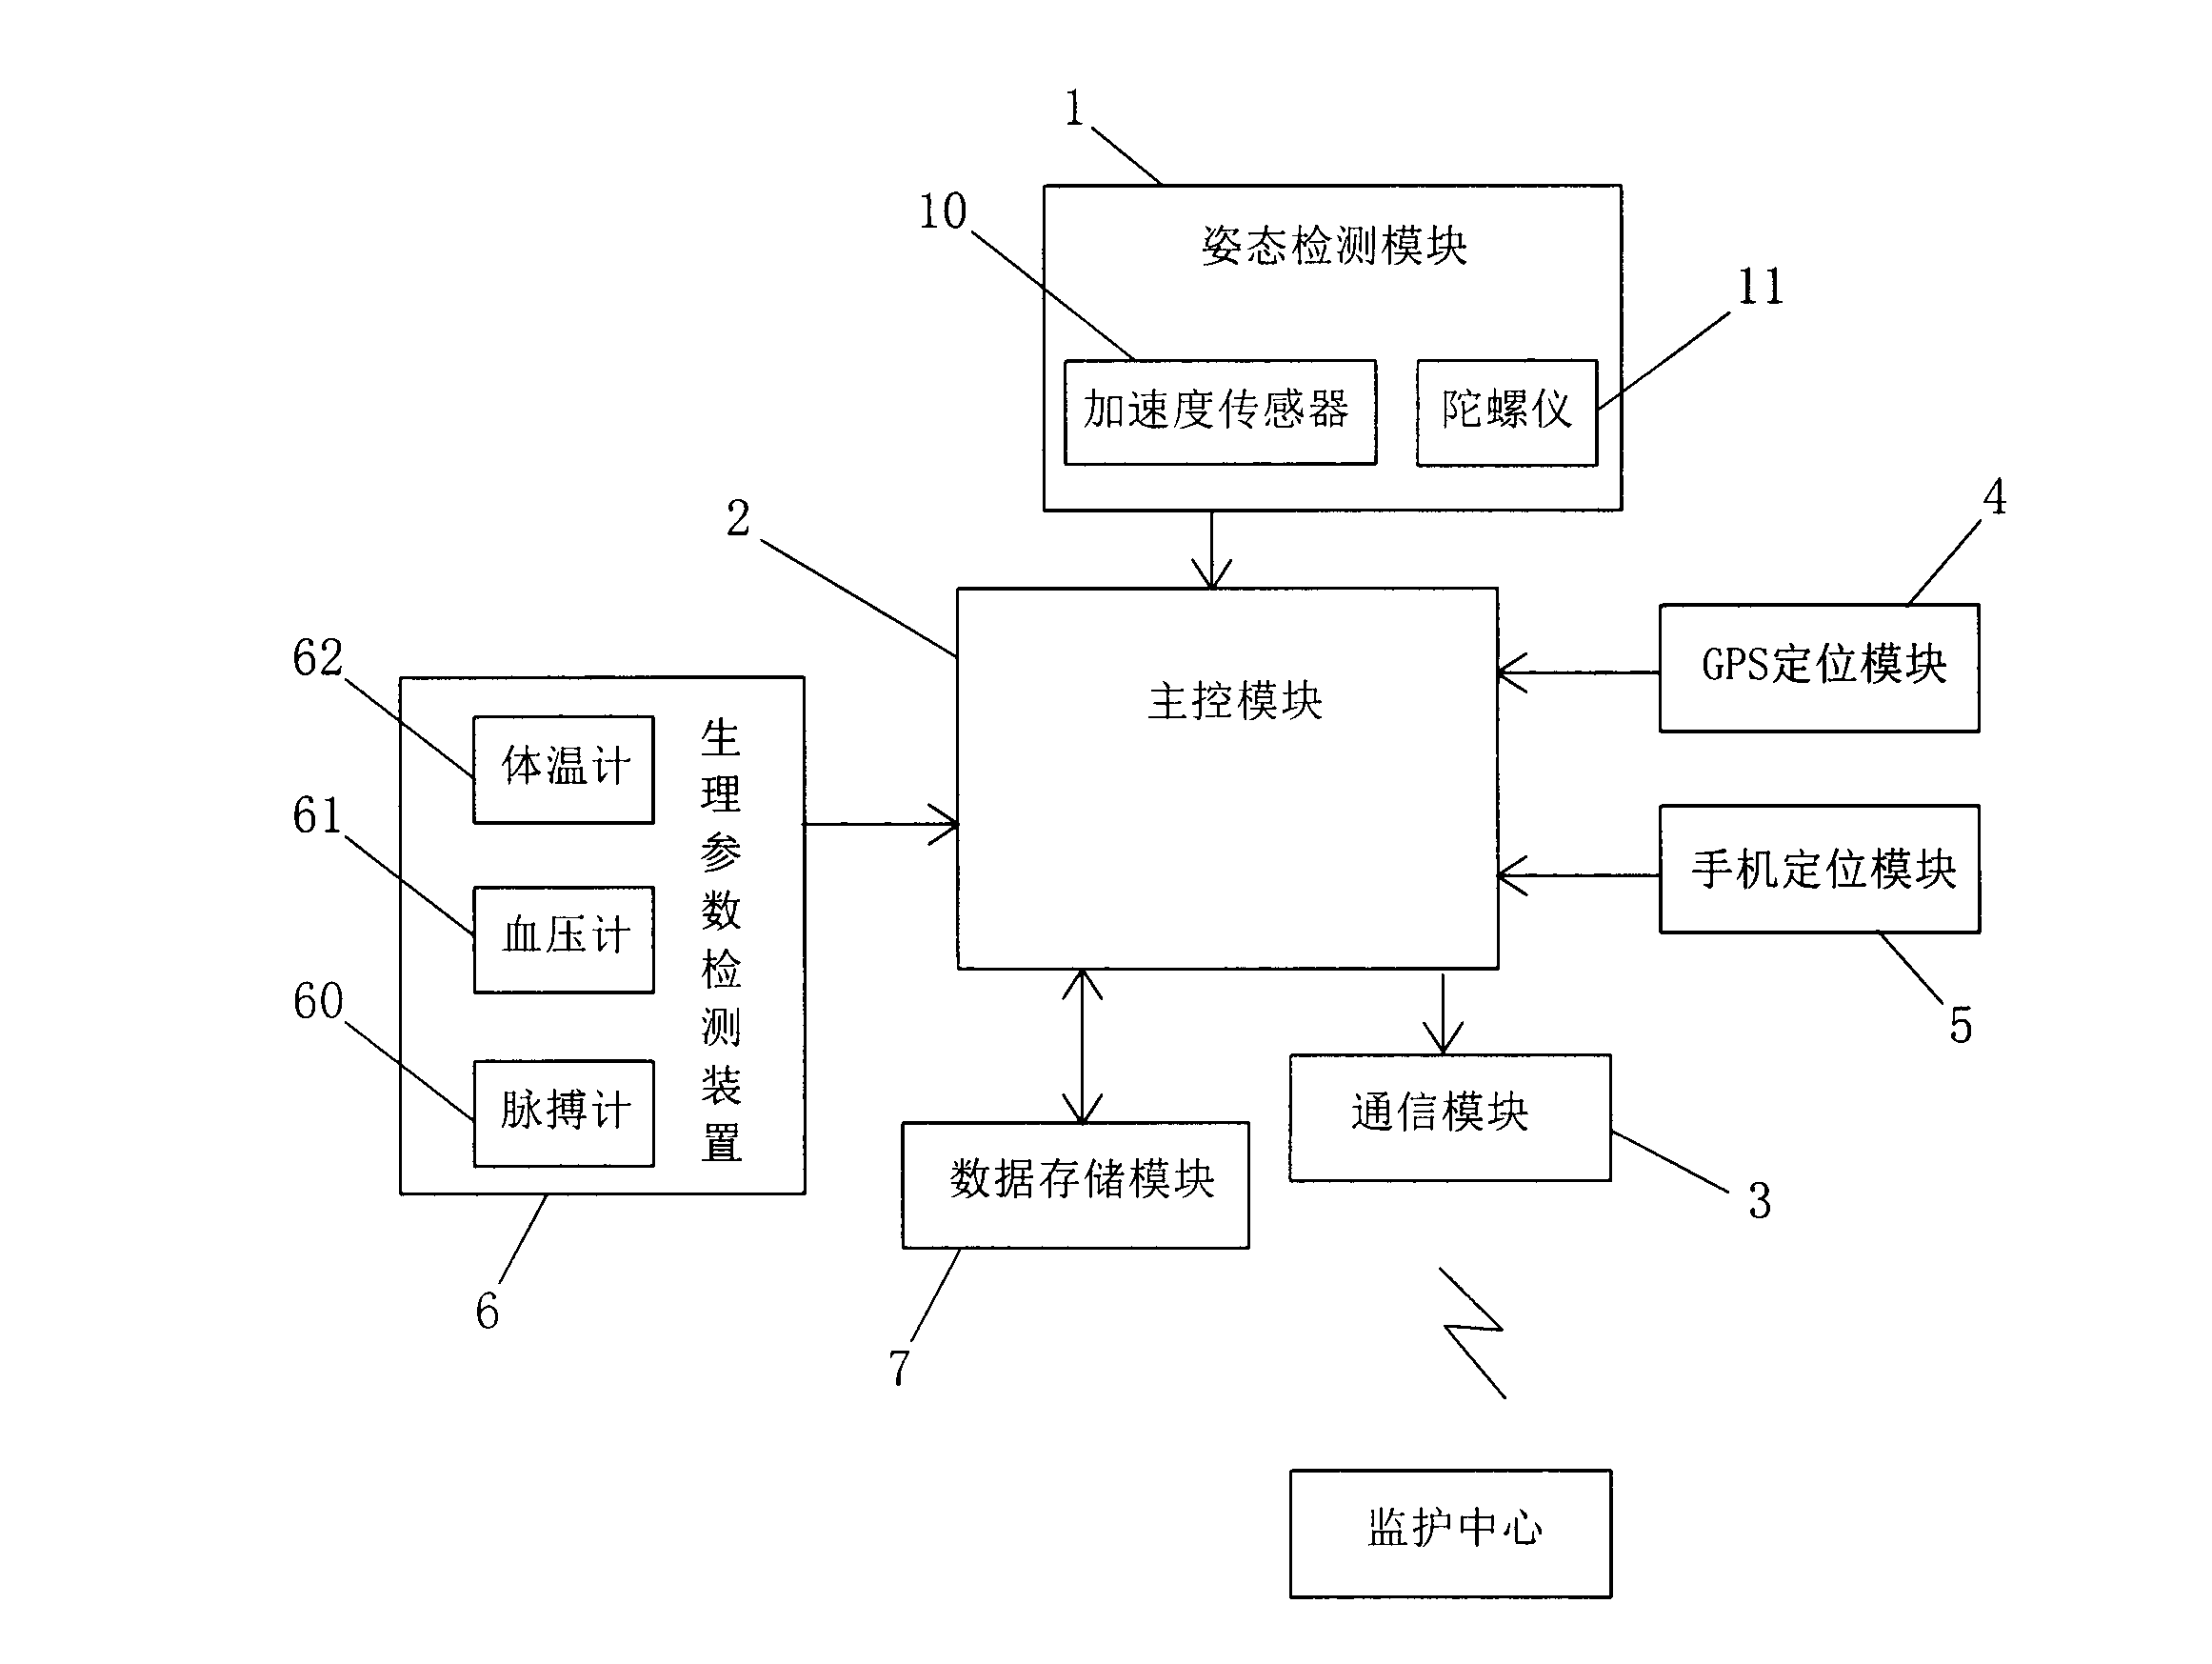 Remote electronic monitoring device